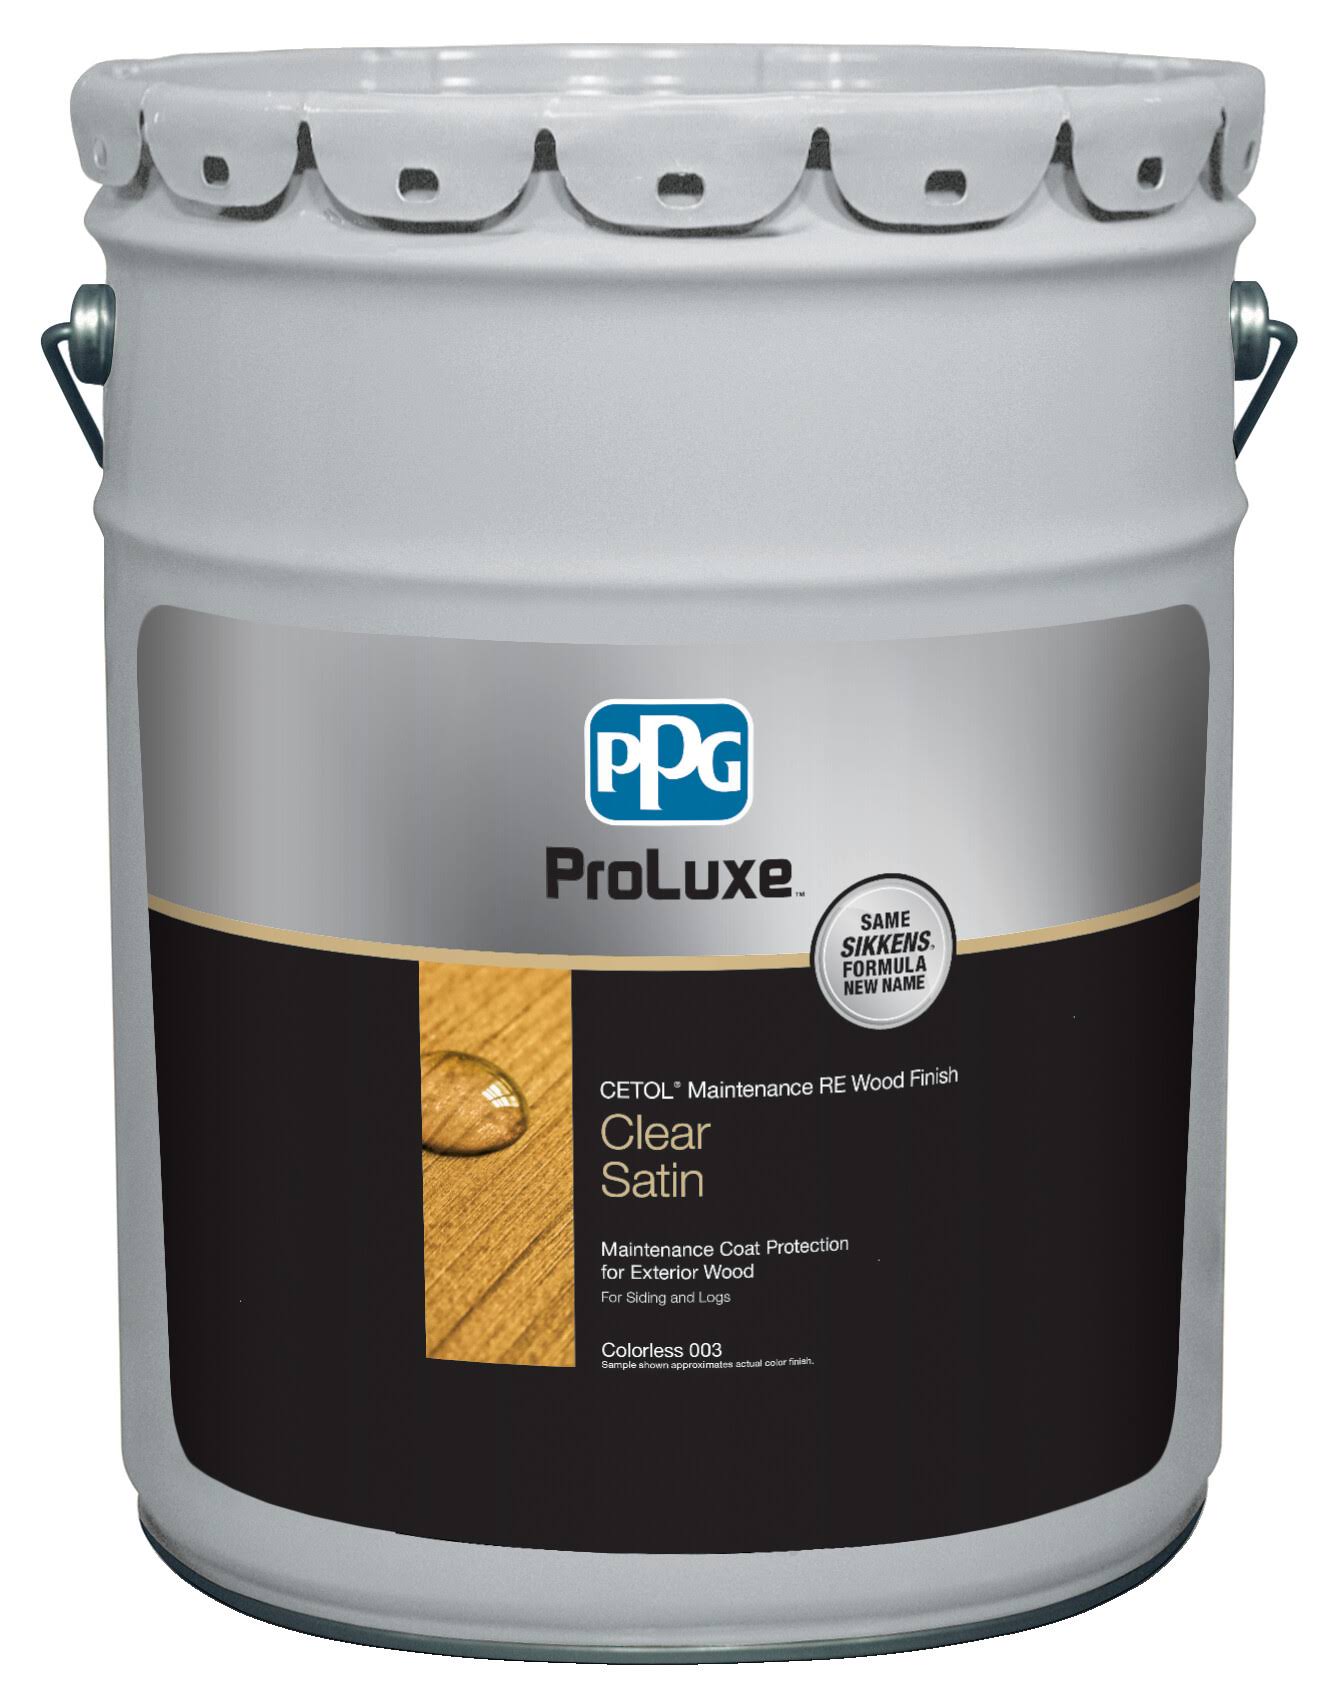 PPG Proluxe Cetol SIK61003/05 Wood Finish, 5 Gal